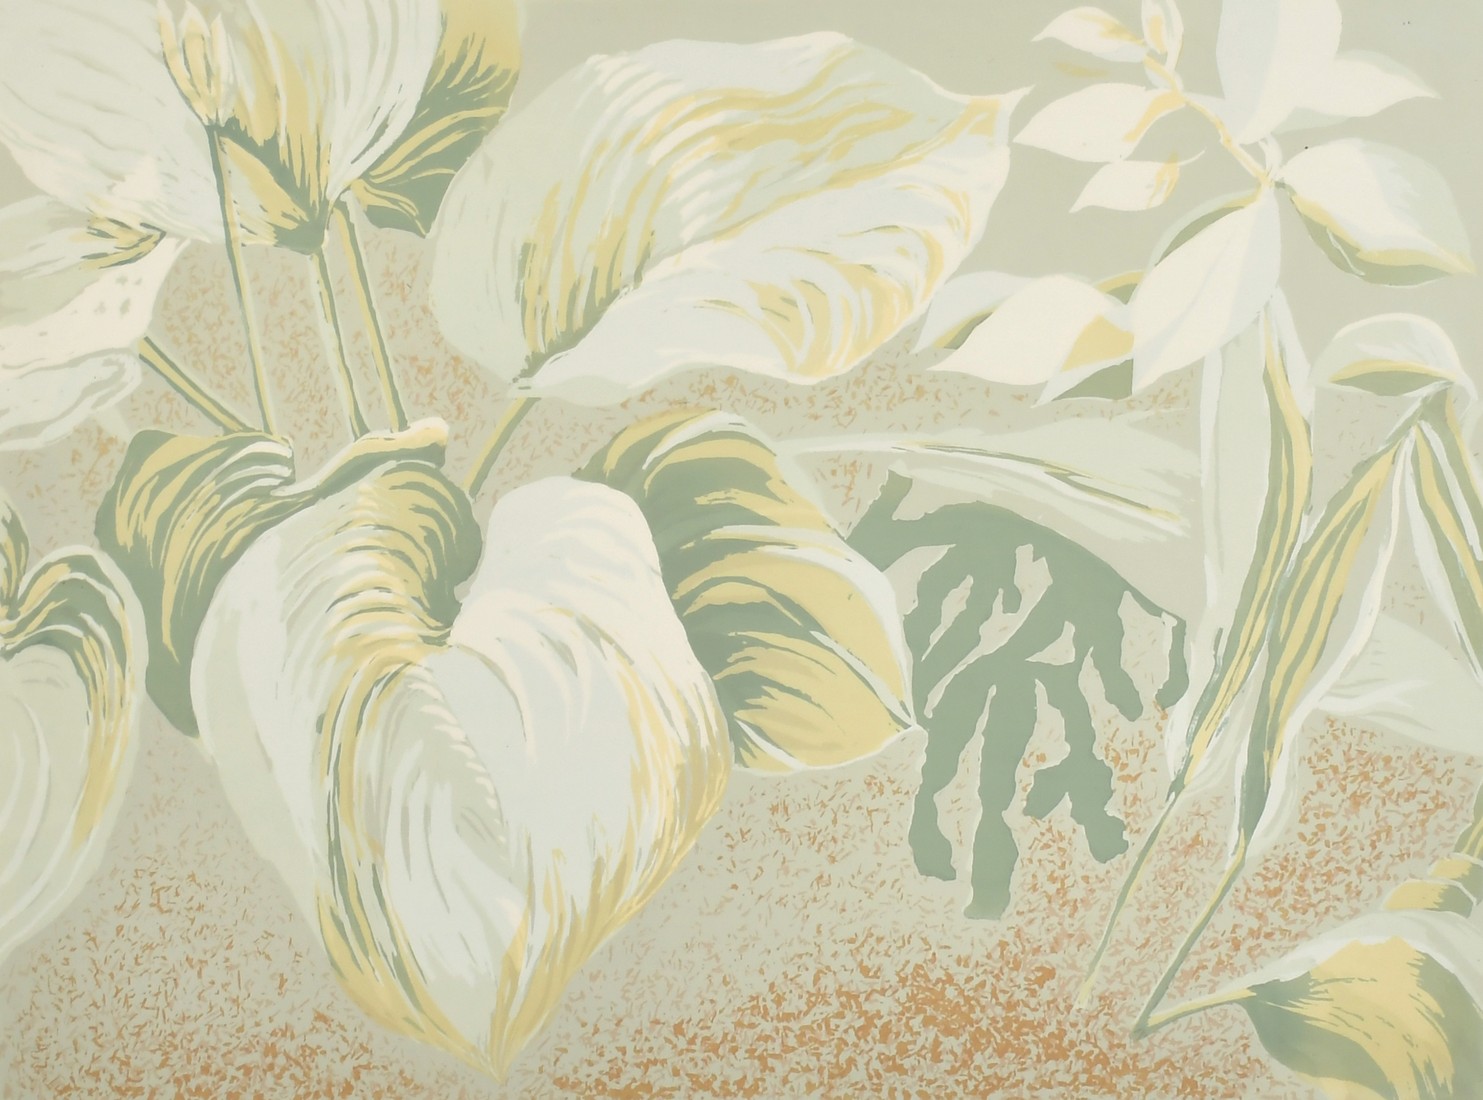 Ruth Hodge, 'Leaves', a colour screen print, signed, inscribed and numbered 6/15 in pencil, 21" x